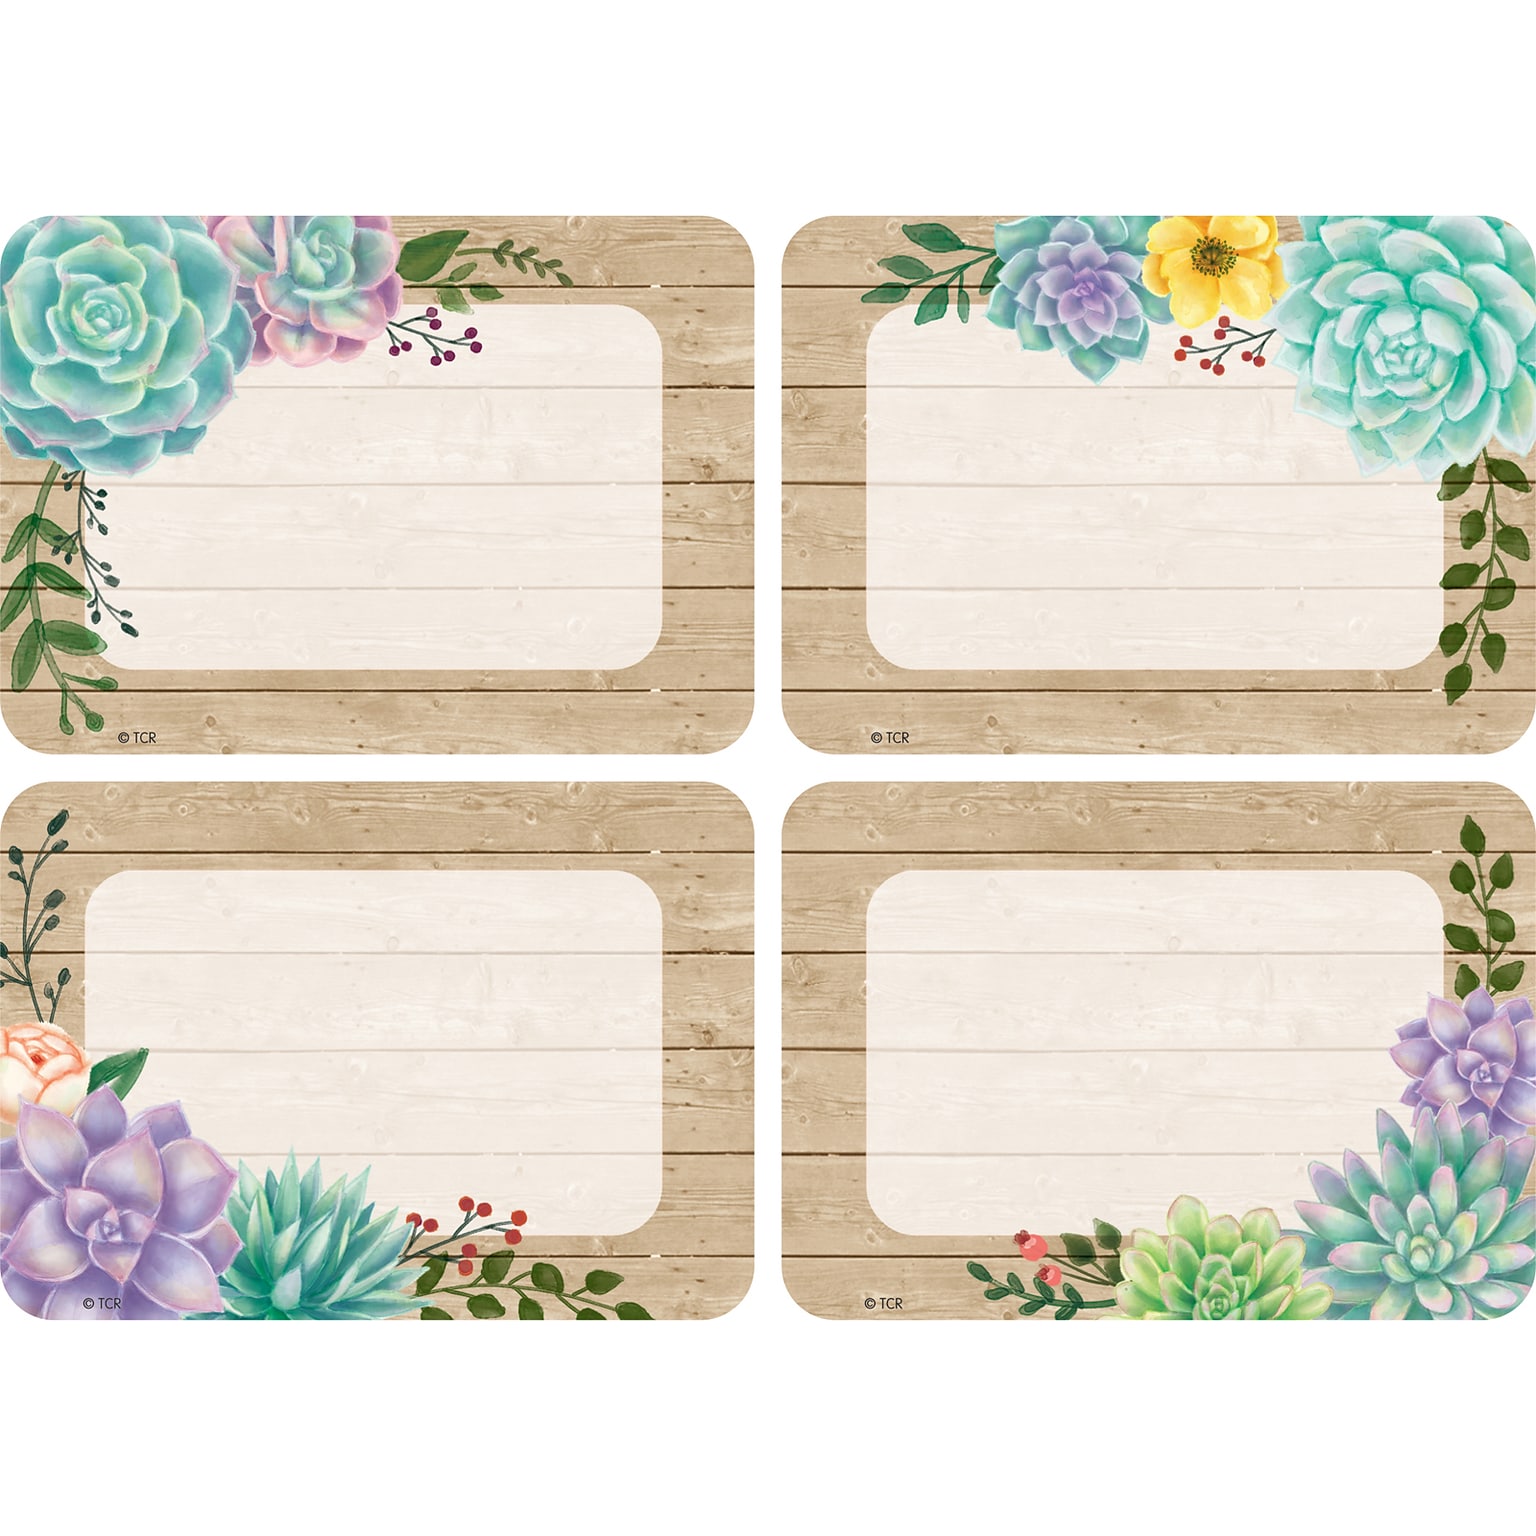 Teacher Created Resources Rustic Bloom Name Tags/Labels, 3.5 x 2.5, 36 Per Pack, 6 Packs (TCR8596-6)